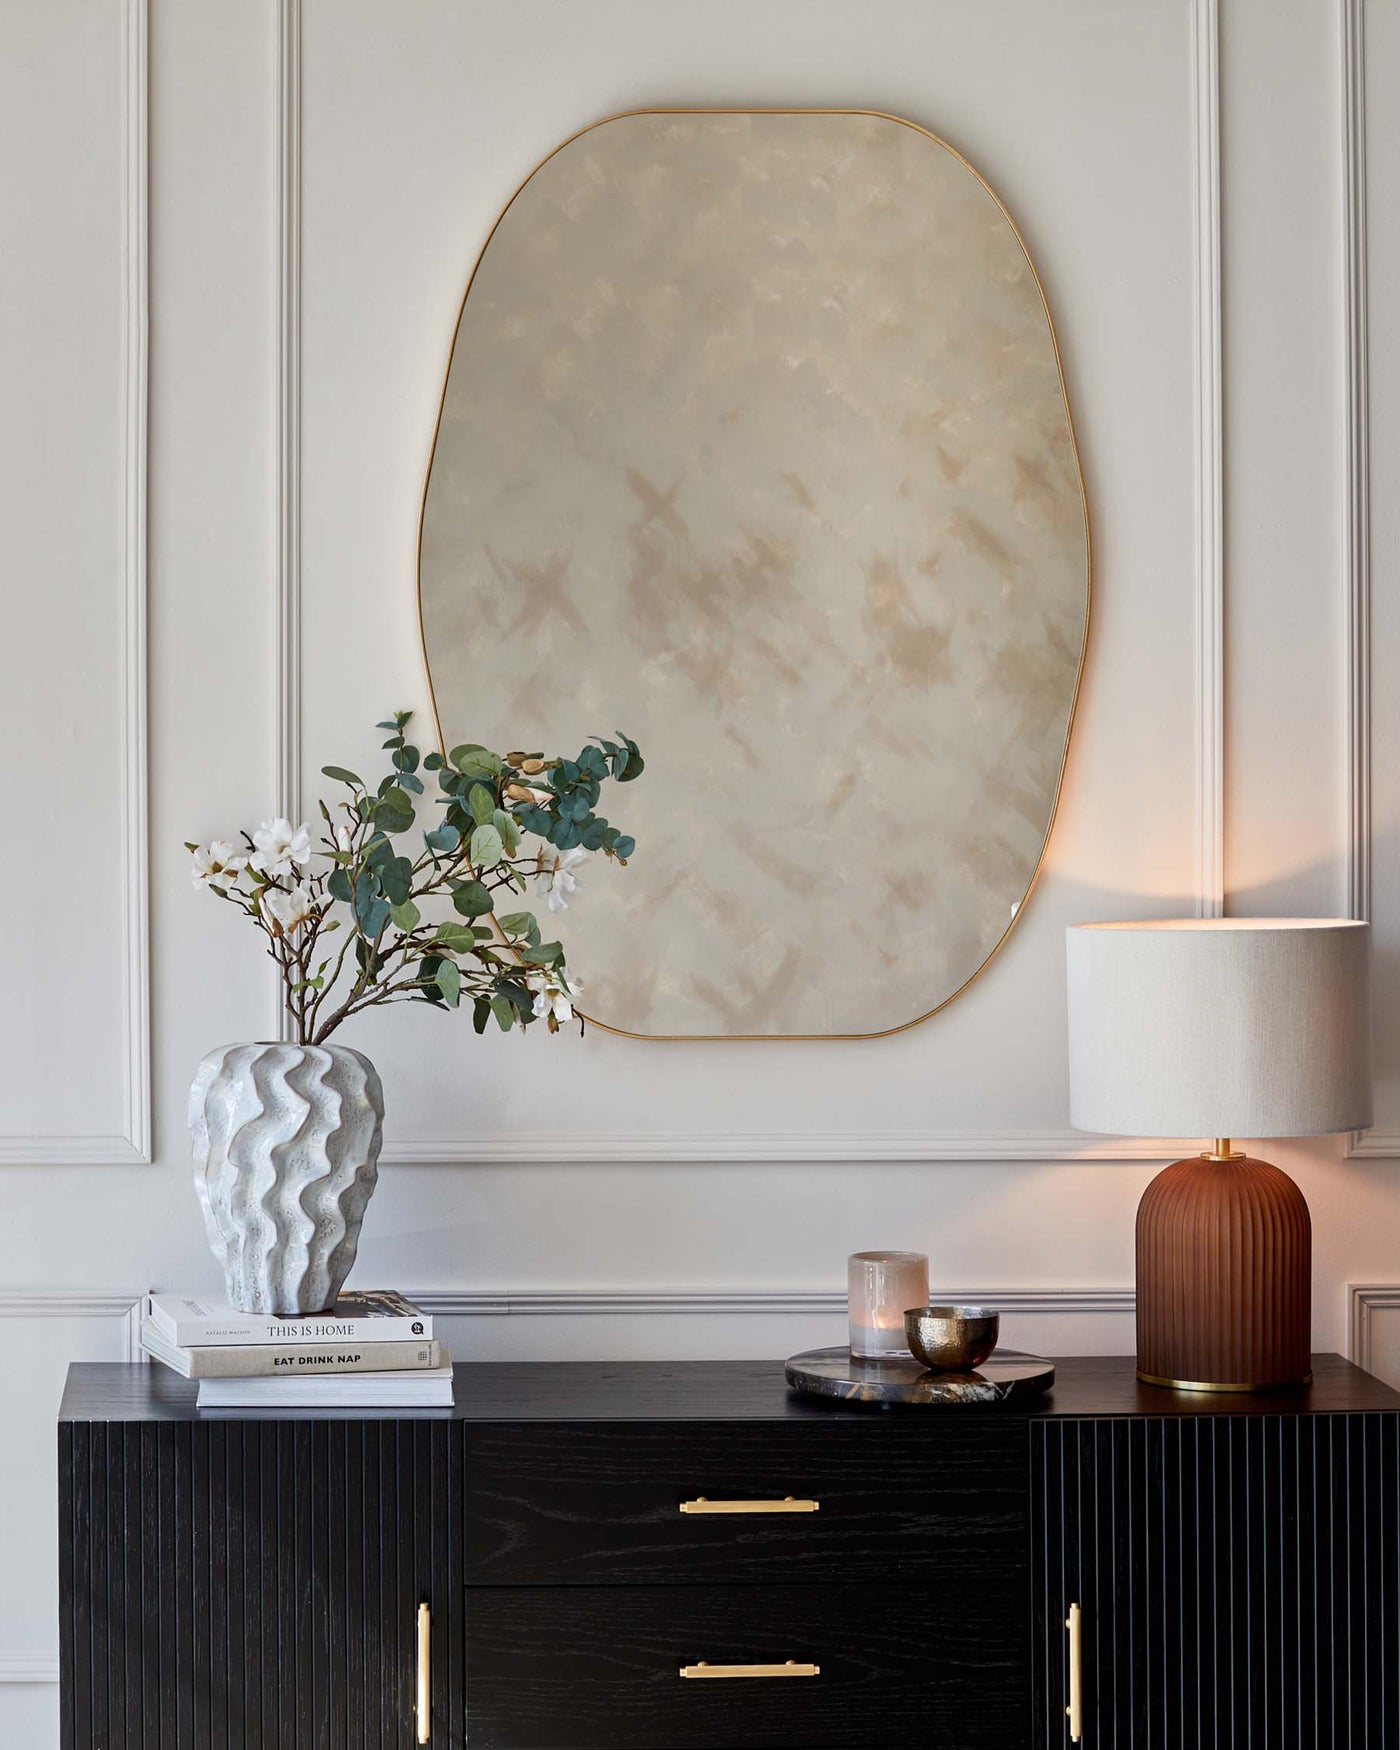 Elegant contemporary black sideboard with brass handles, set against a detailed white panel wall, complemented by a decorative wavy white vase on a stack of hardcover books, with a cylindrical lamp featuring a wood-textured base and white shade on one end of the sideboard, next to a tray holding a candle and cup. A large, abstract cloudy mirror with a subtle gold frame hangs above, anchoring the sophisticated vignette.